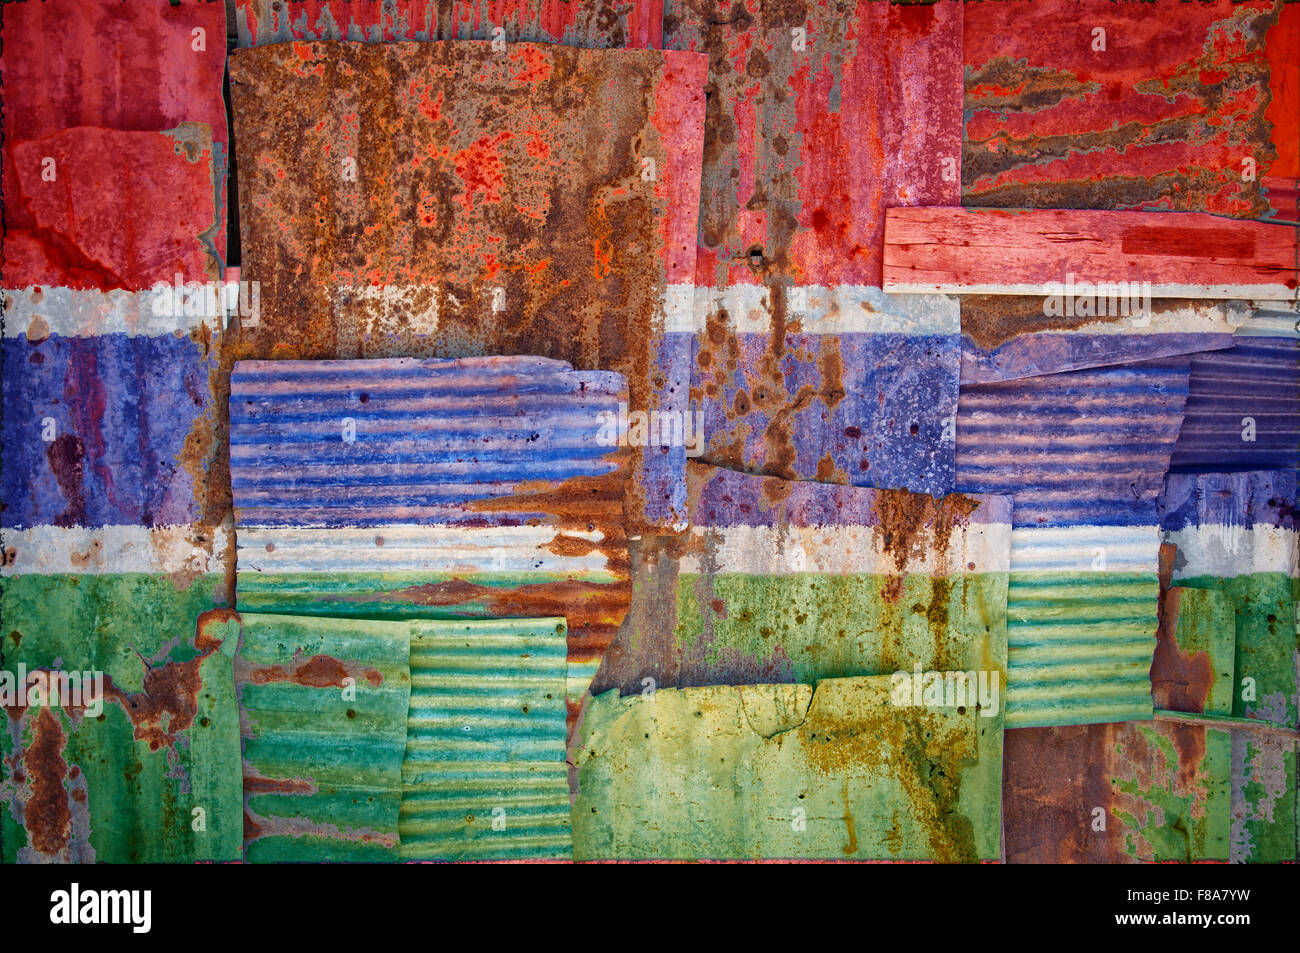 An abstract background image of the flag of Gambia painted on to rusty corrugated iron sheets overlapping to form a wall Stock Photo